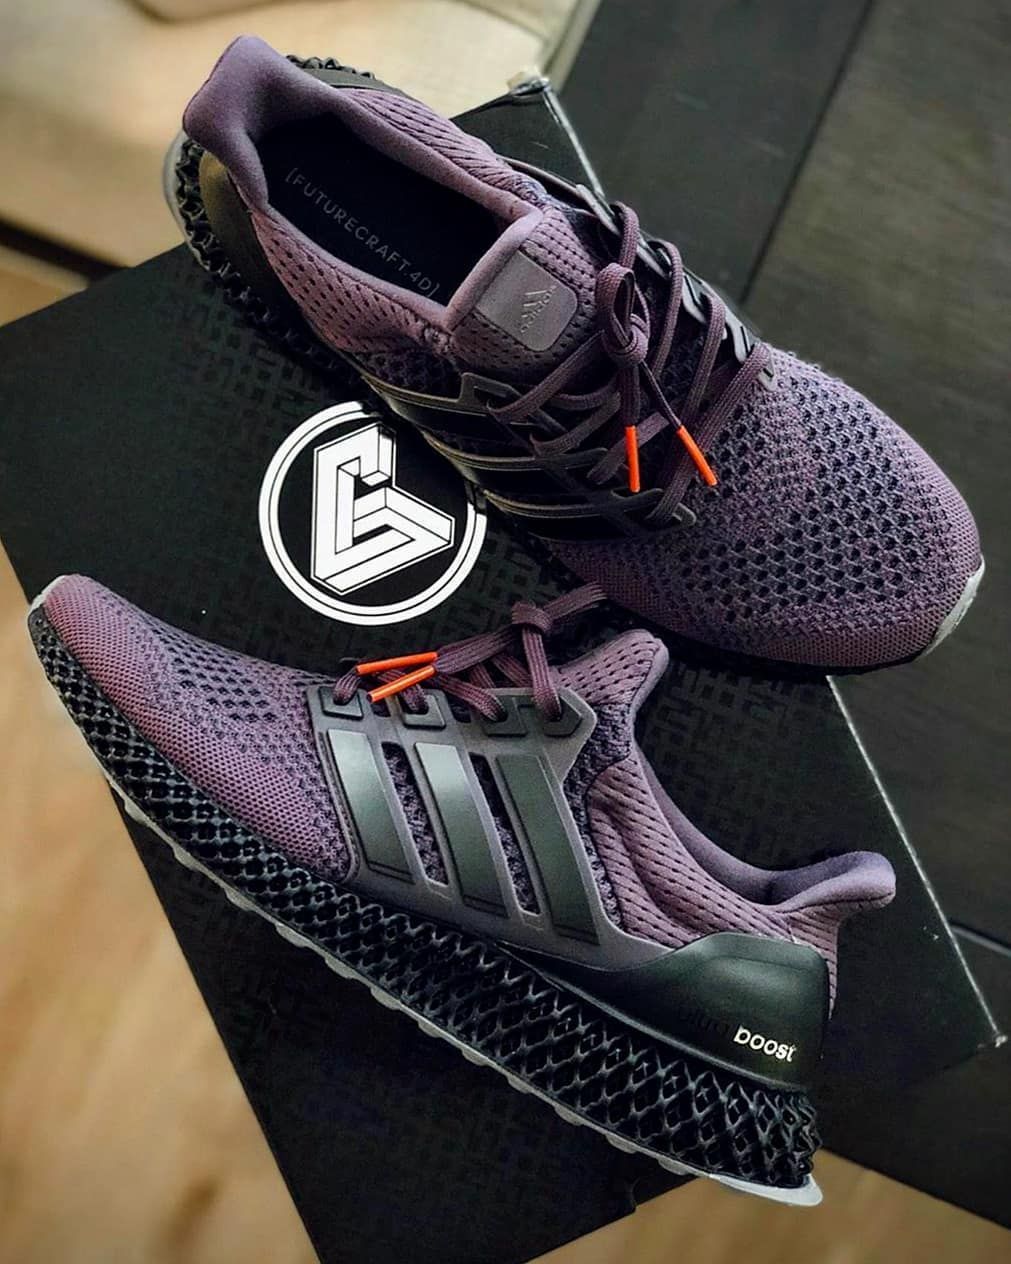 The Sole Supplier on Twitter: "This adidas Ultra Boost 1.0 4D custom is  INSANE... Would you cop? 🔮 📷: https://t.co/DpHGGhSg5d  https://t.co/KeMYAuQptR" / Twitter